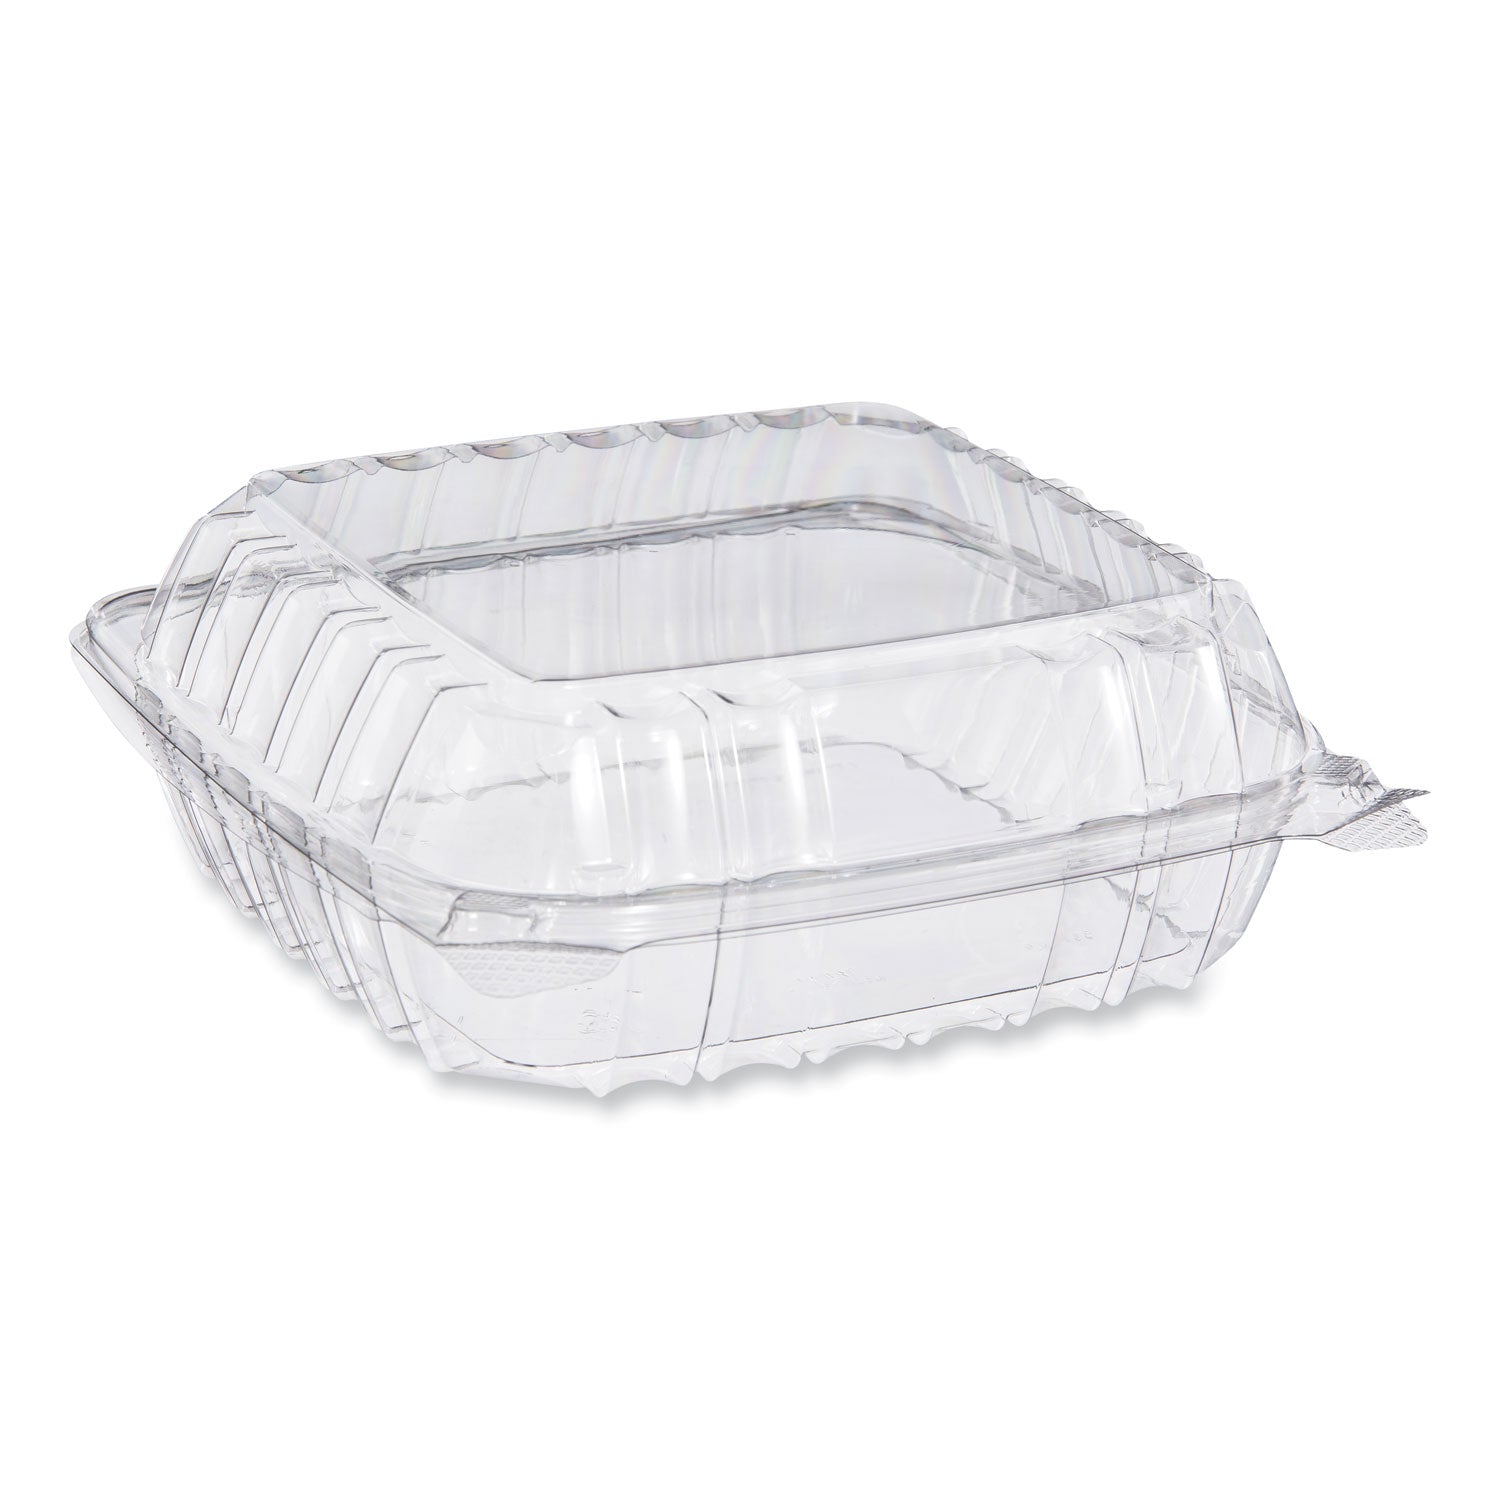 clearseal-hinged-lid-plastic-containers-822w-x-302h-clear-plastic-250-carton_dccpet90pst1 - 1